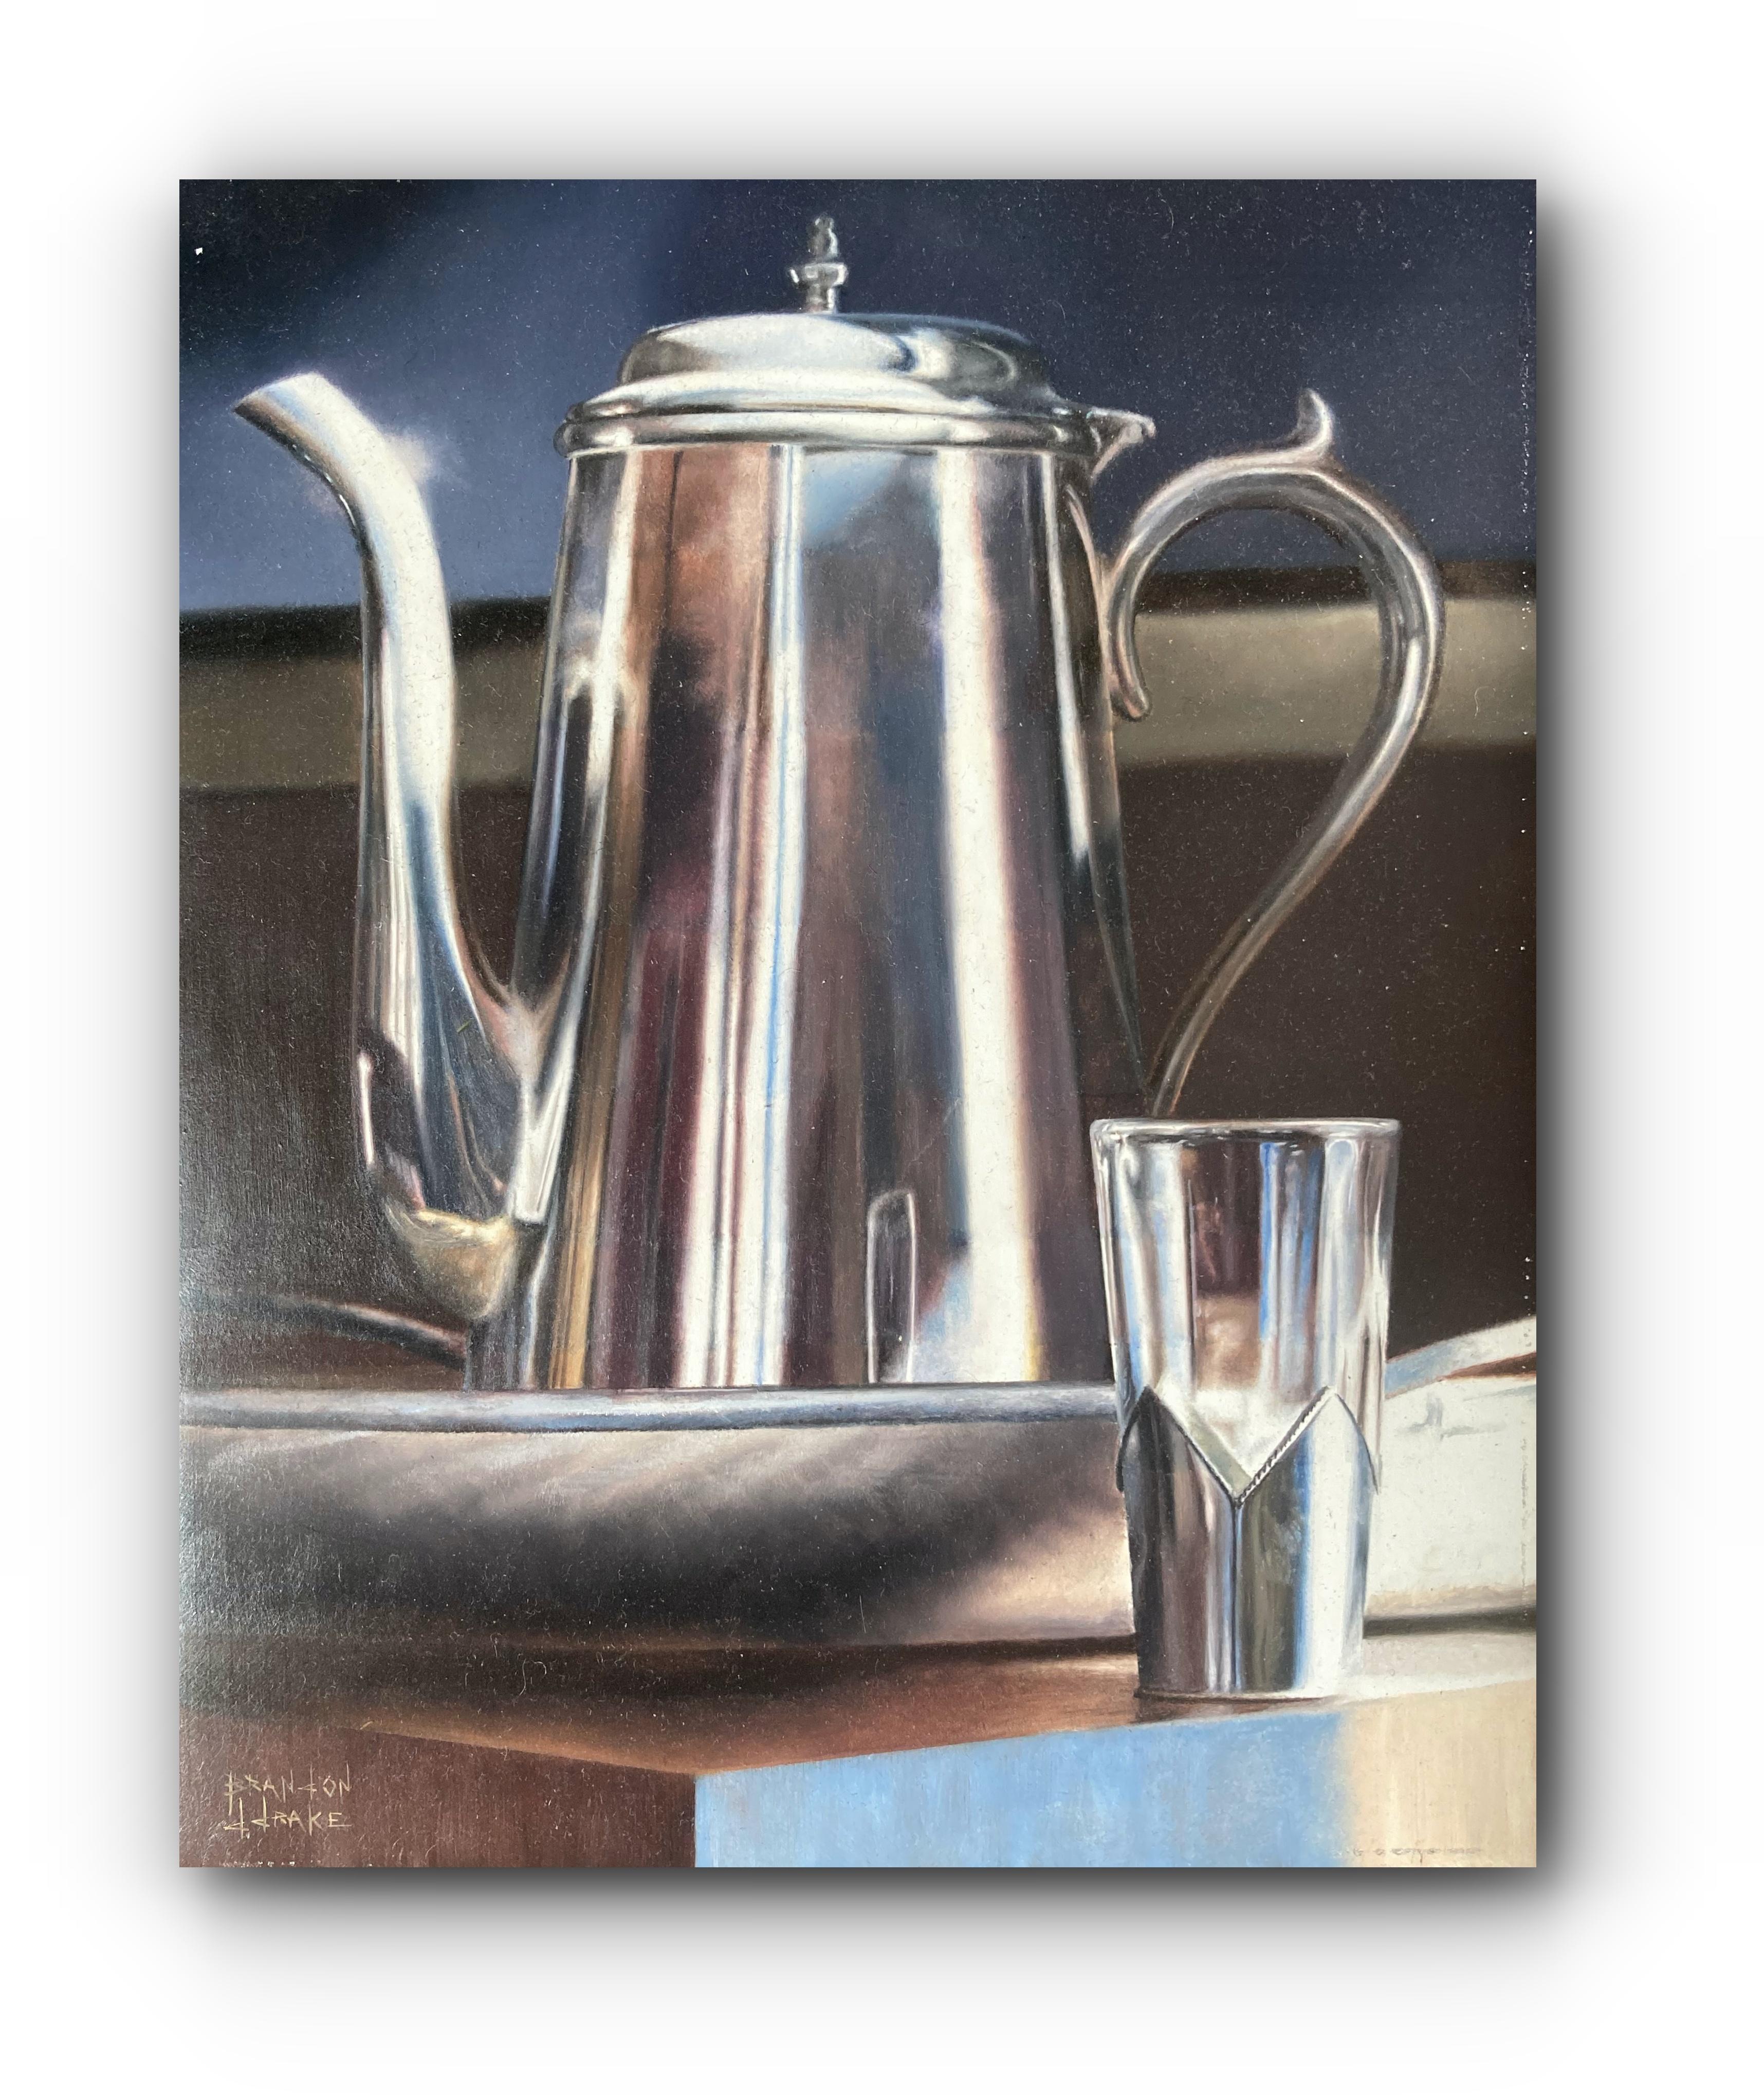 Afternoon Drink (Super-Realism Contemporary Photorealistic Still Life Painting)